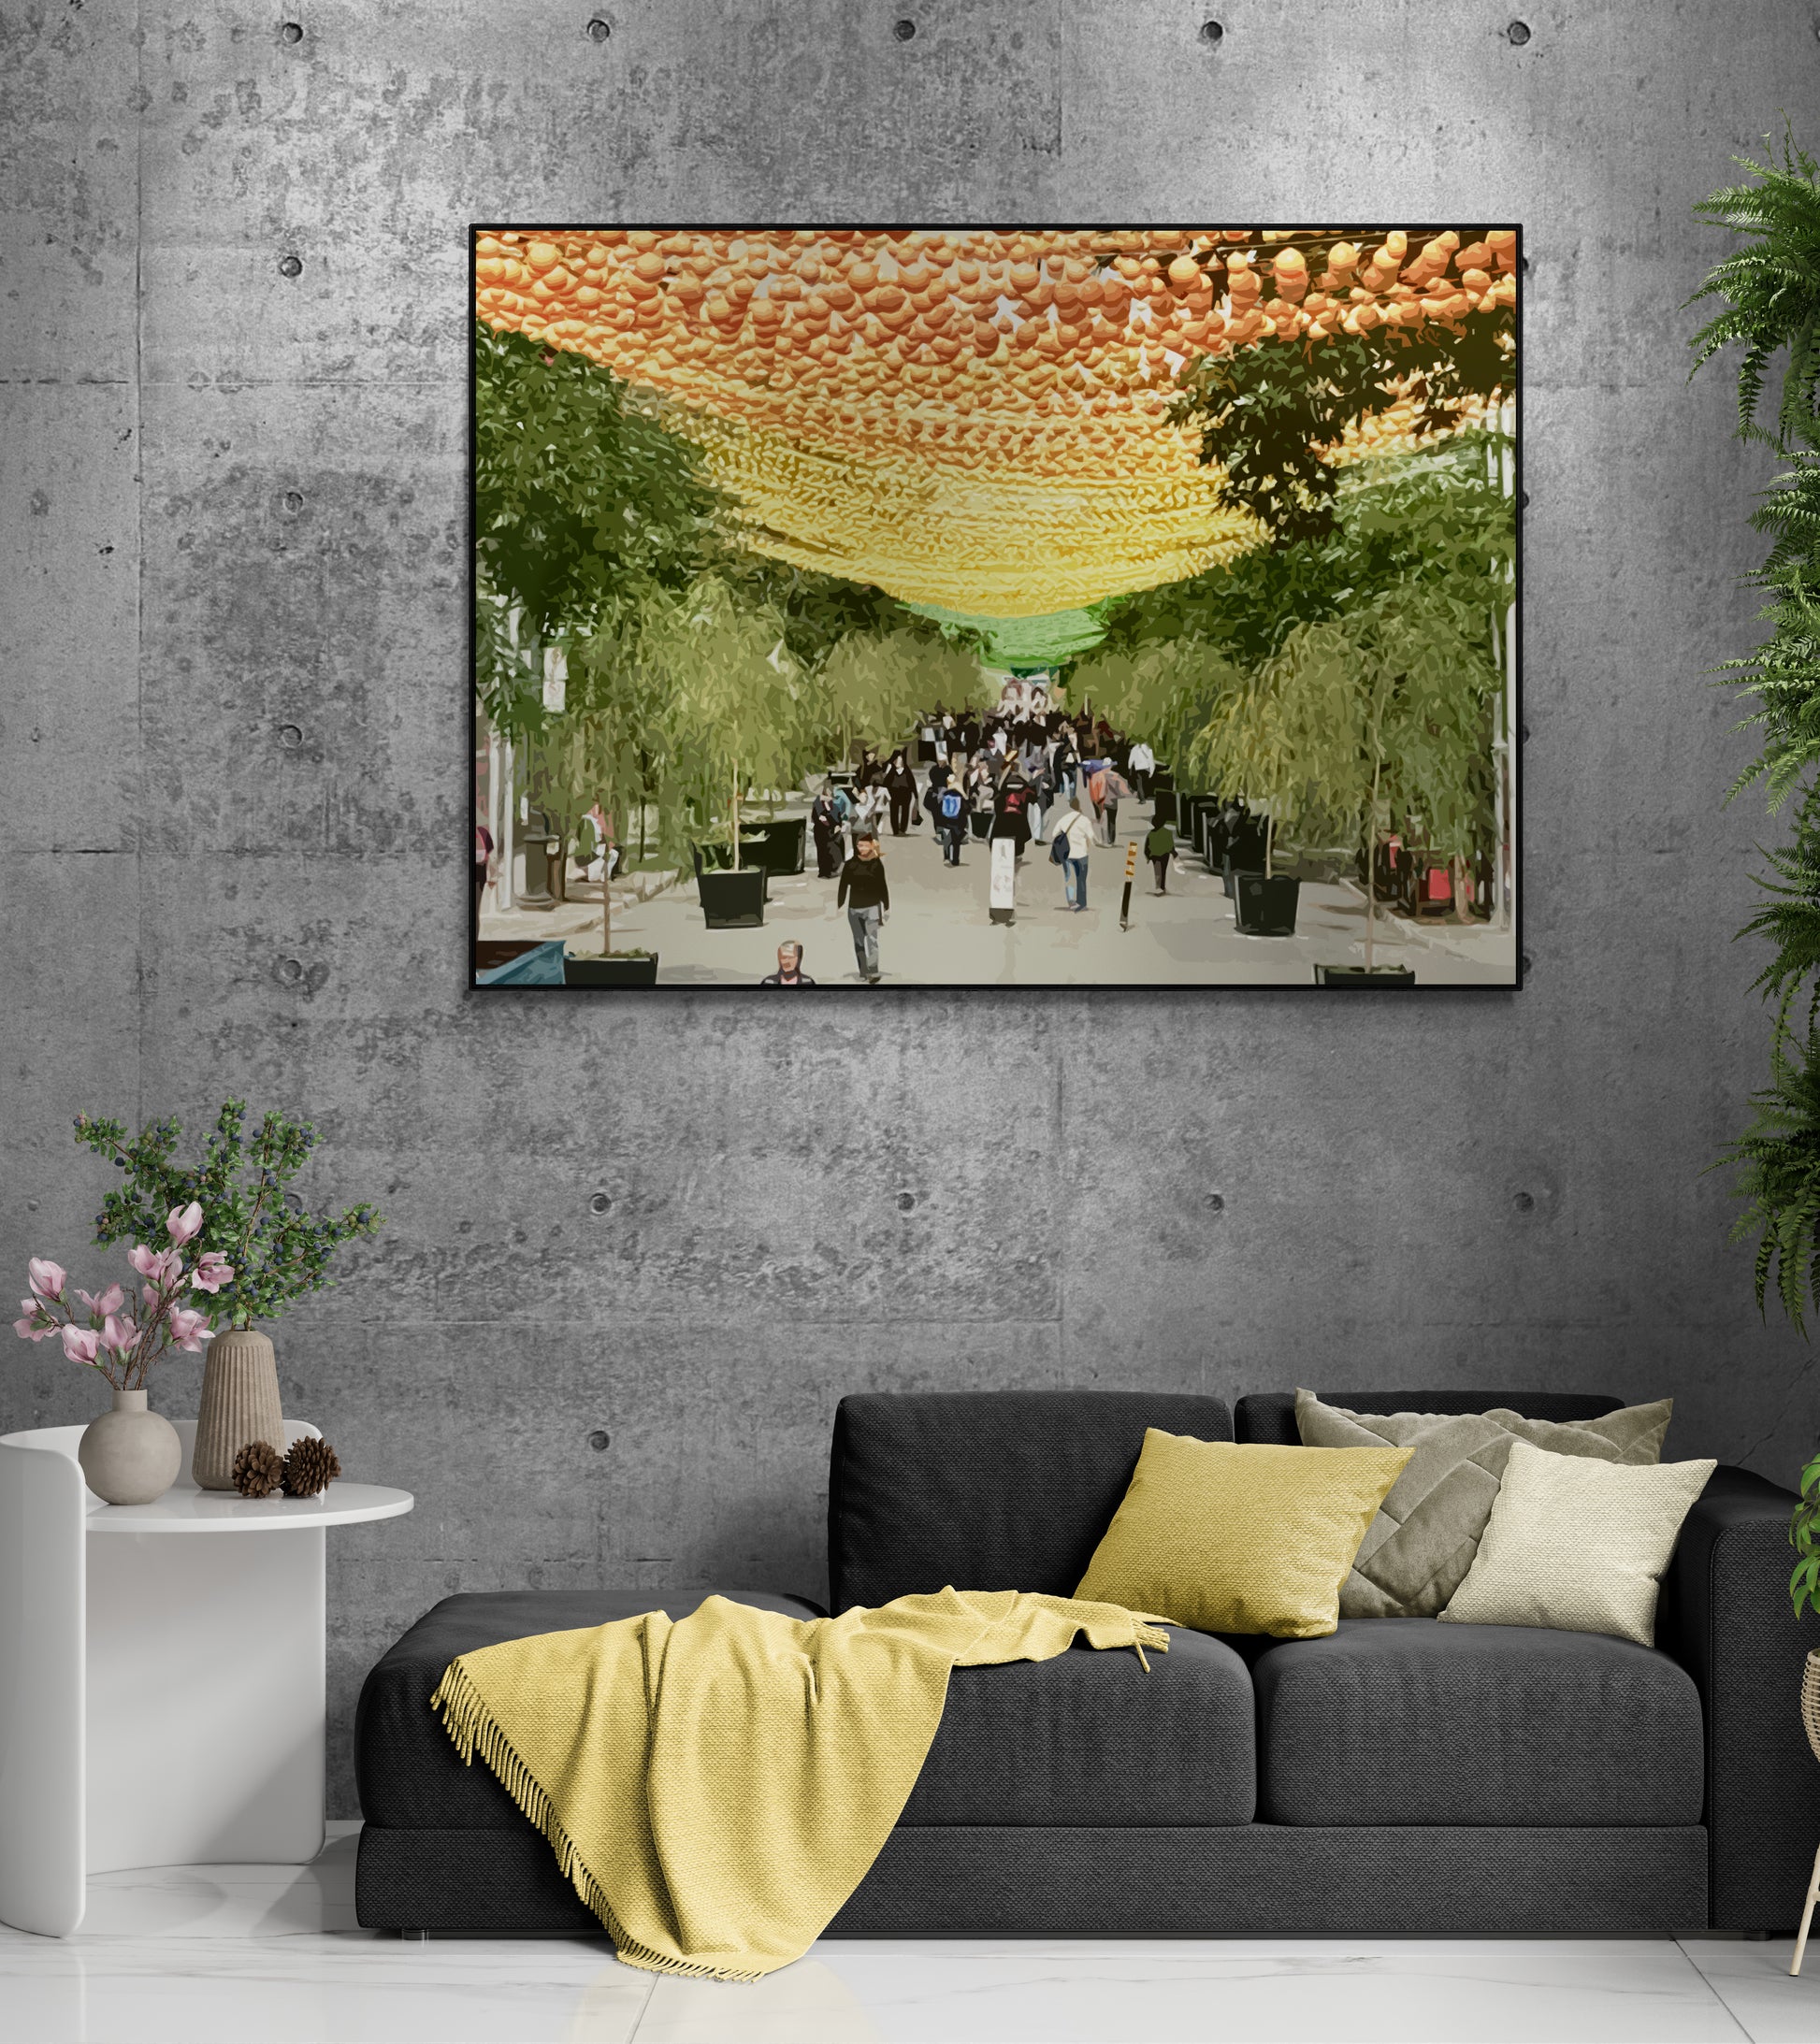 The Village Canvas Wall Art in lounge room with grey concrete wall, black lounge, yellow blanket, several cushions, white side table, several pot plants and polished tile flooring